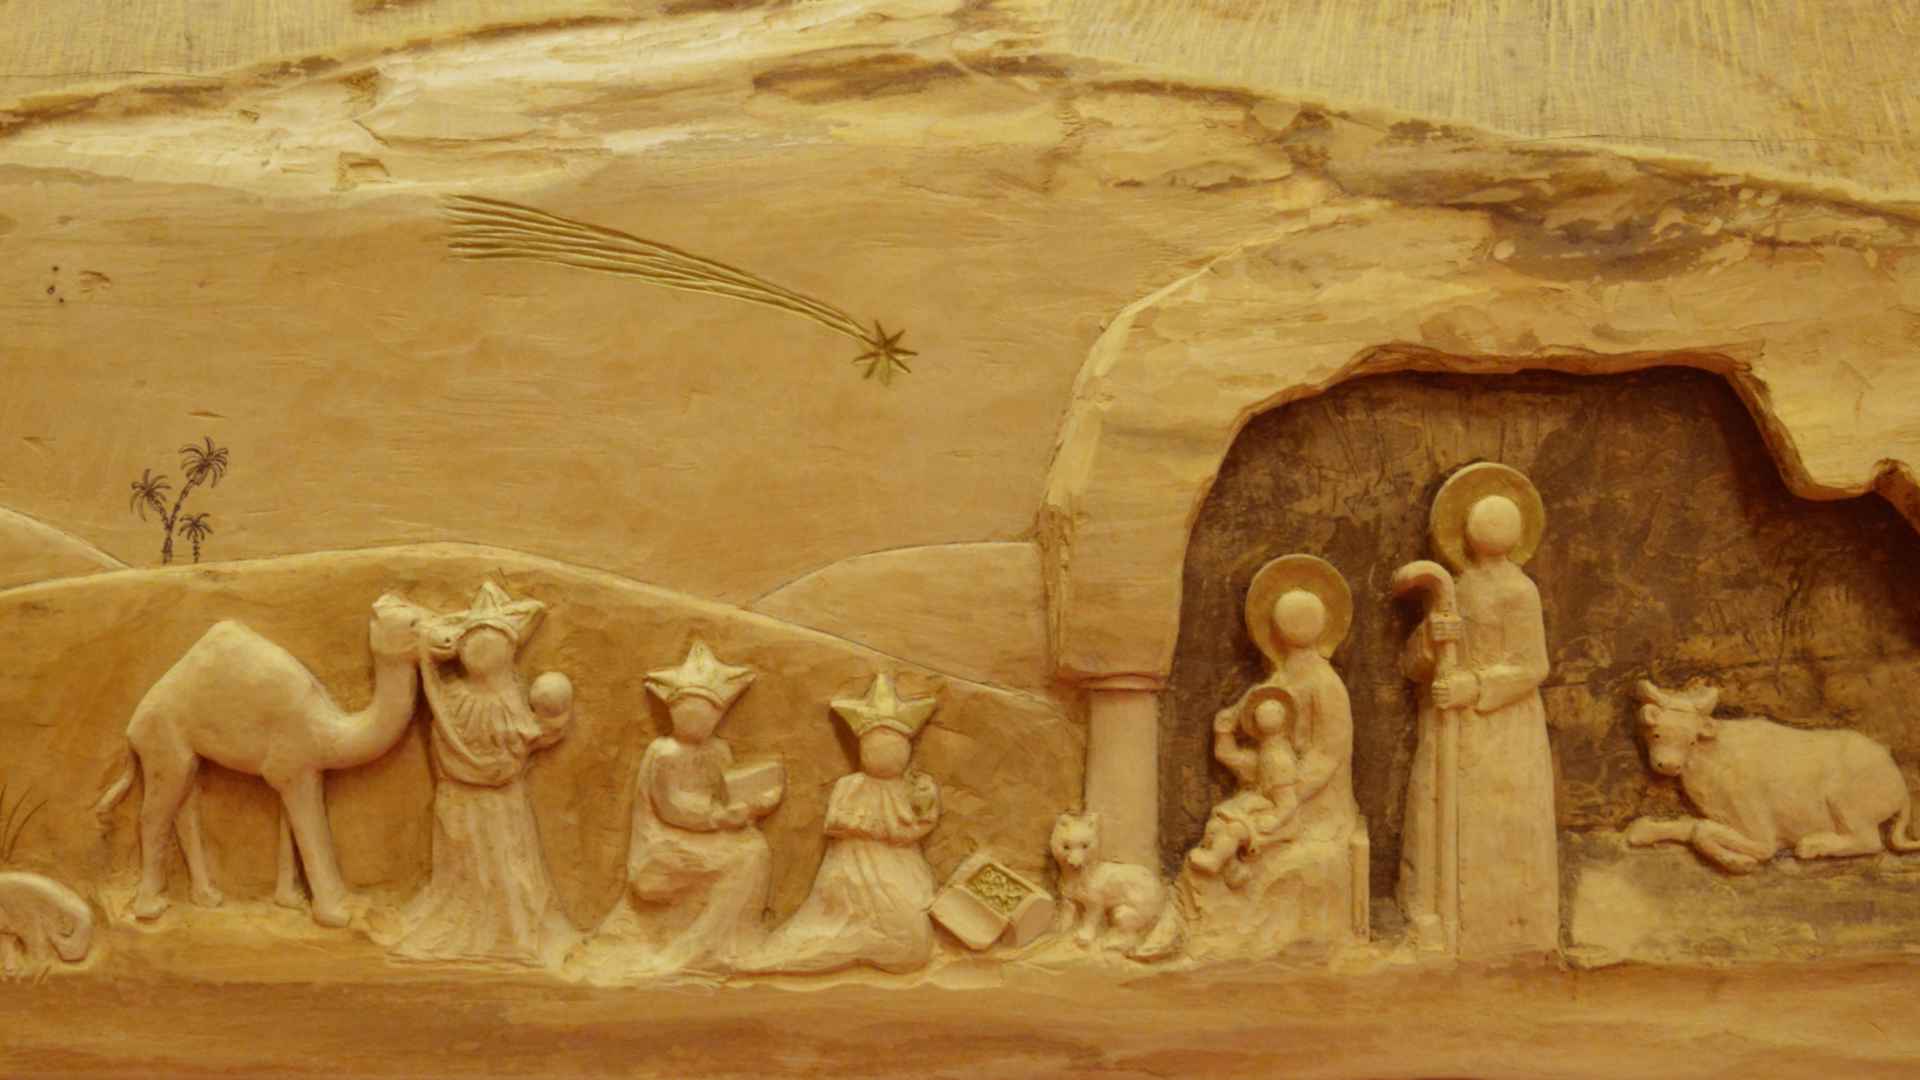 An engraving of the nativity scene